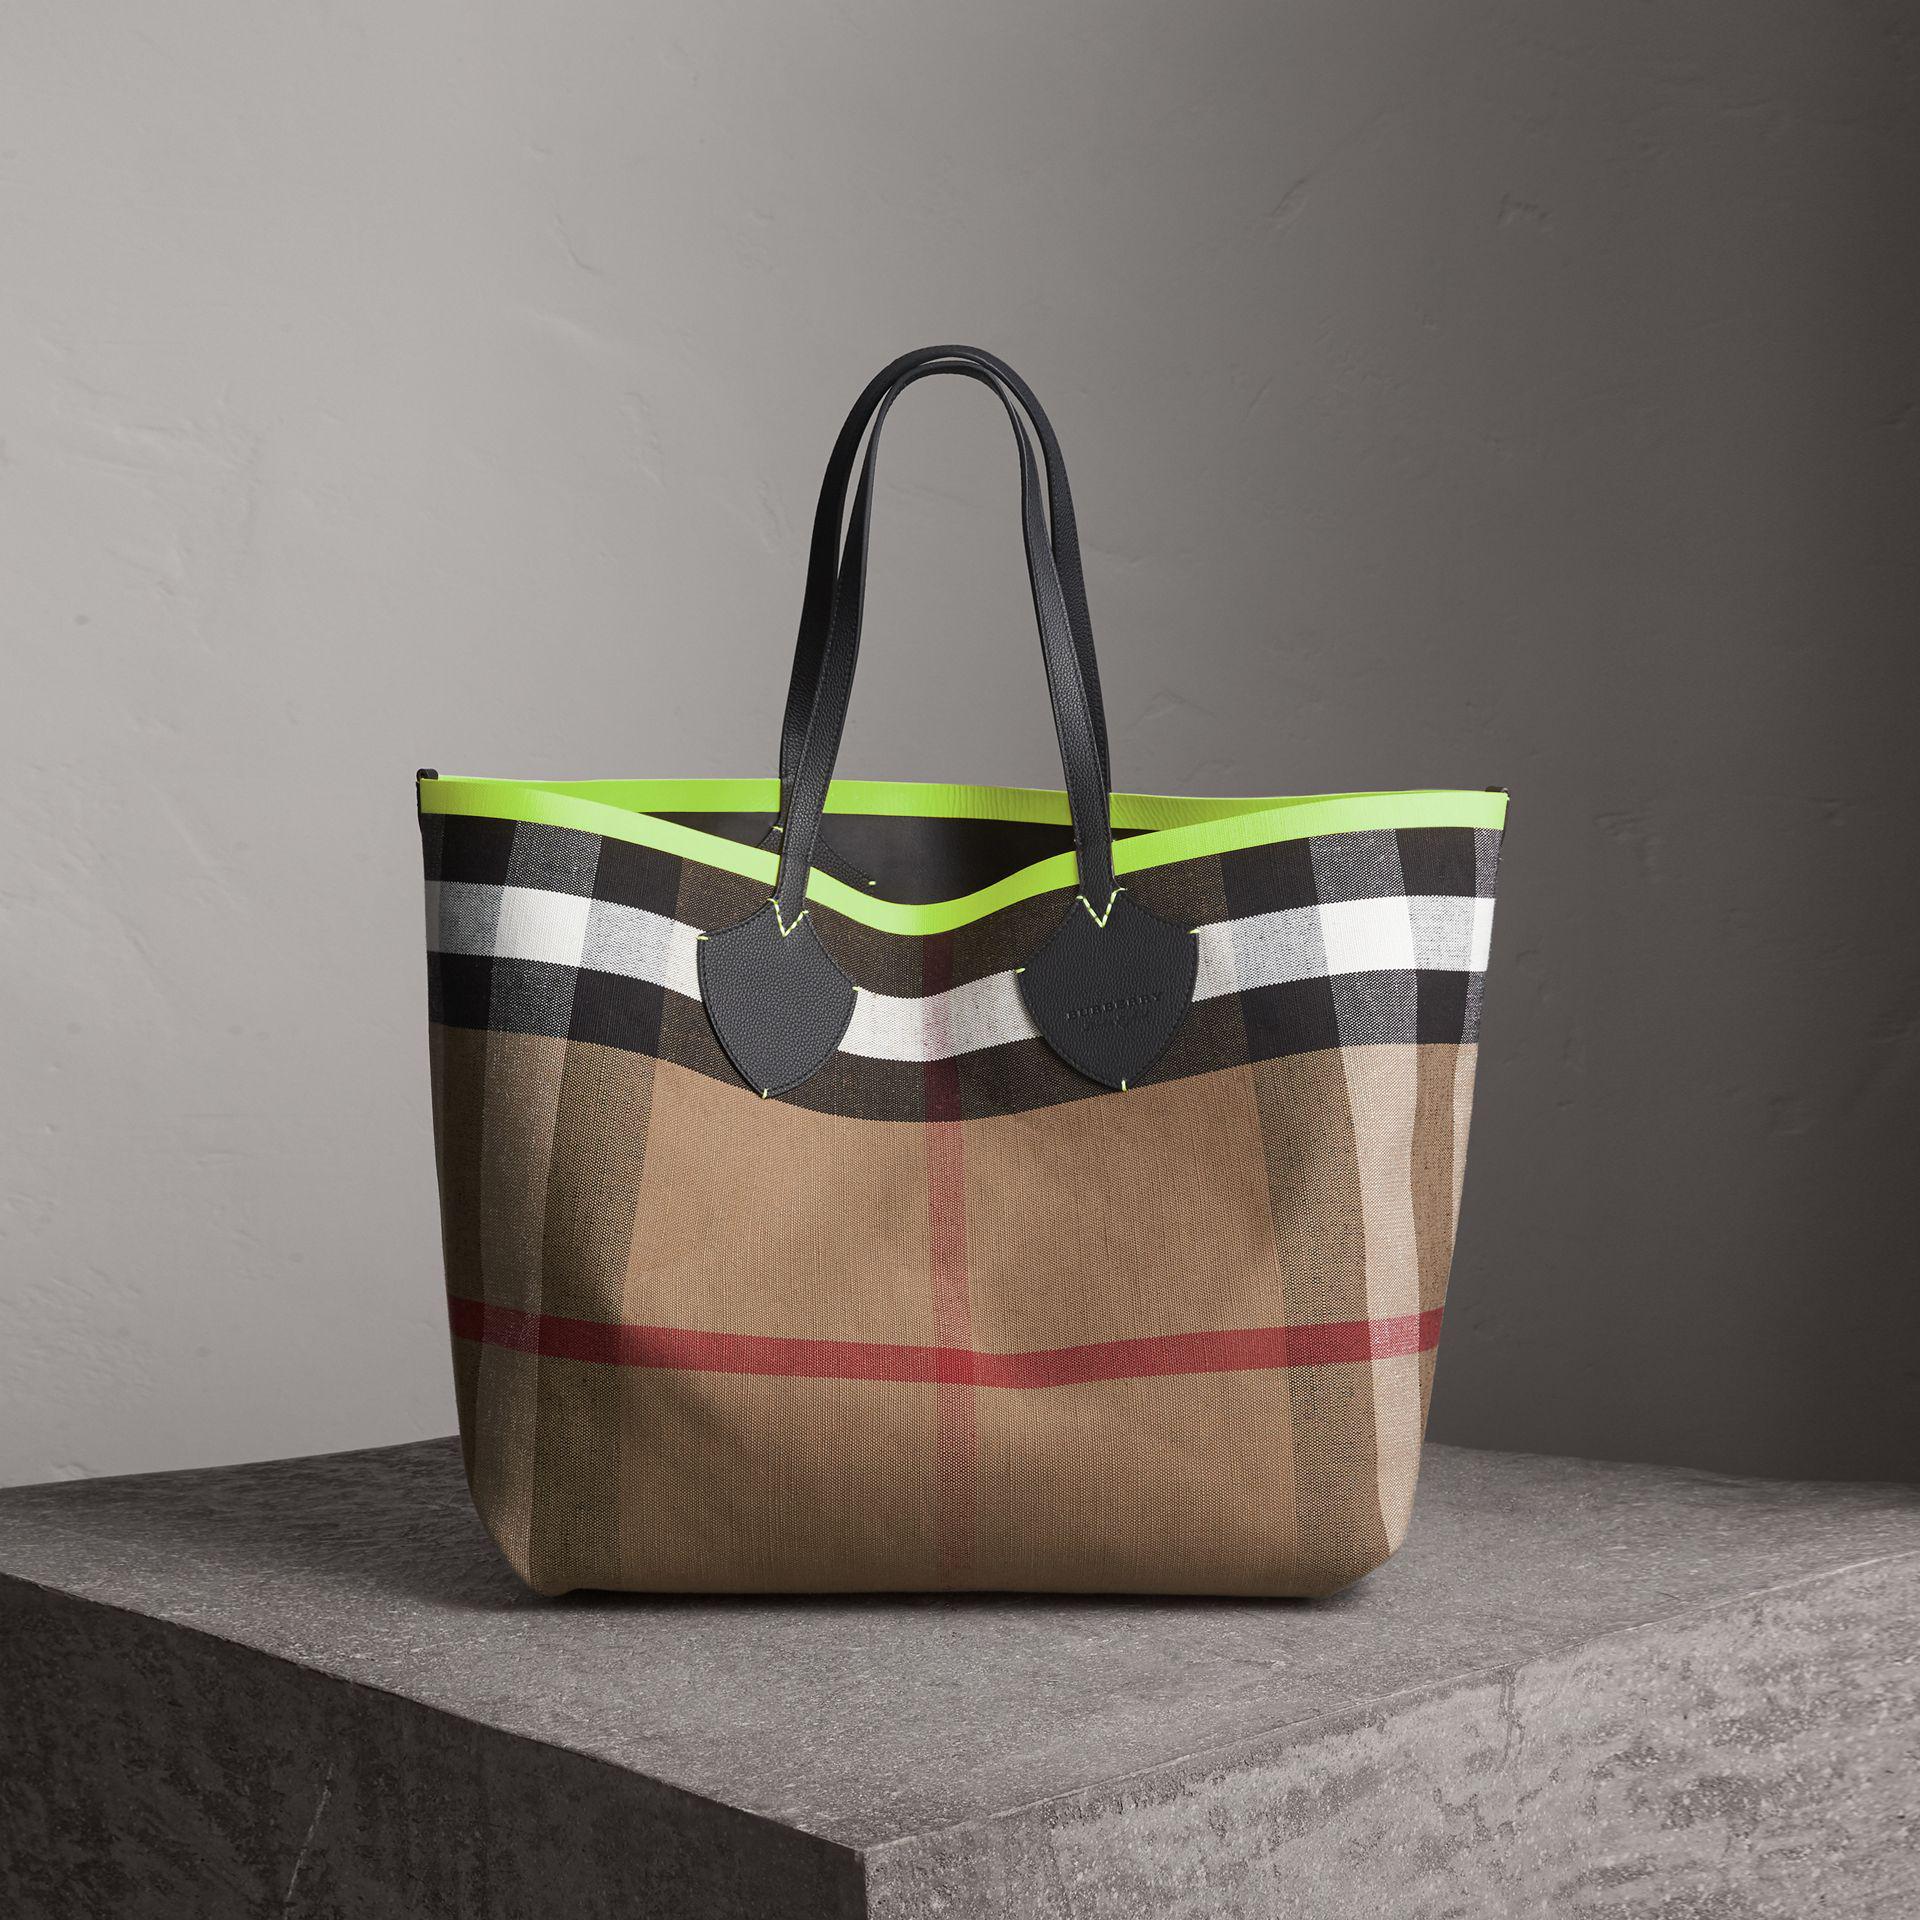 Burberry Large Leather Tote Bag, $2,195, Burberry